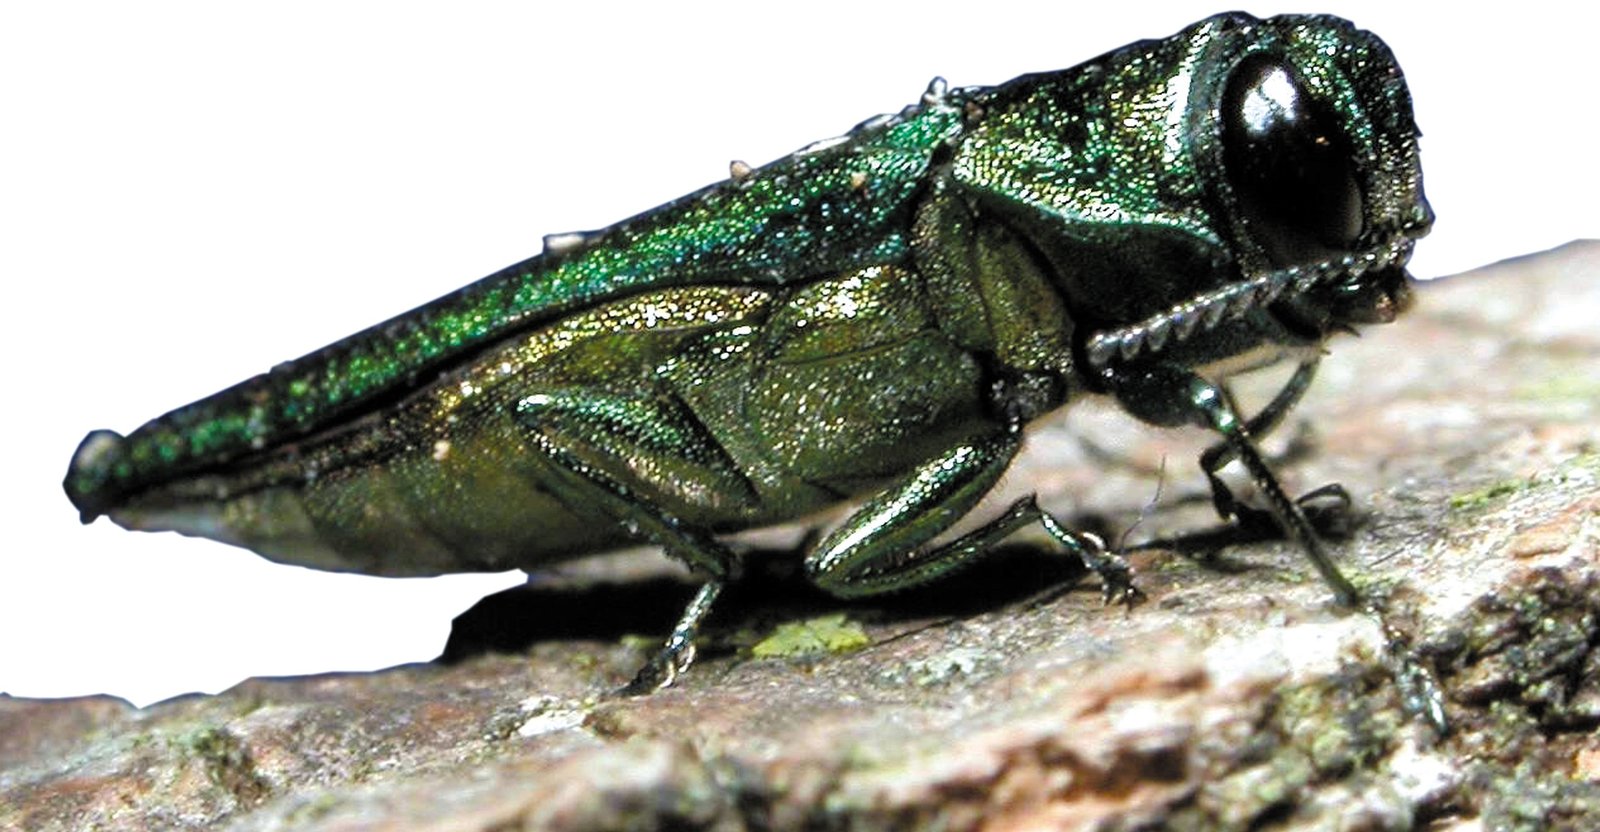 Emerald Ash Borer Pest Control Products and Supplies